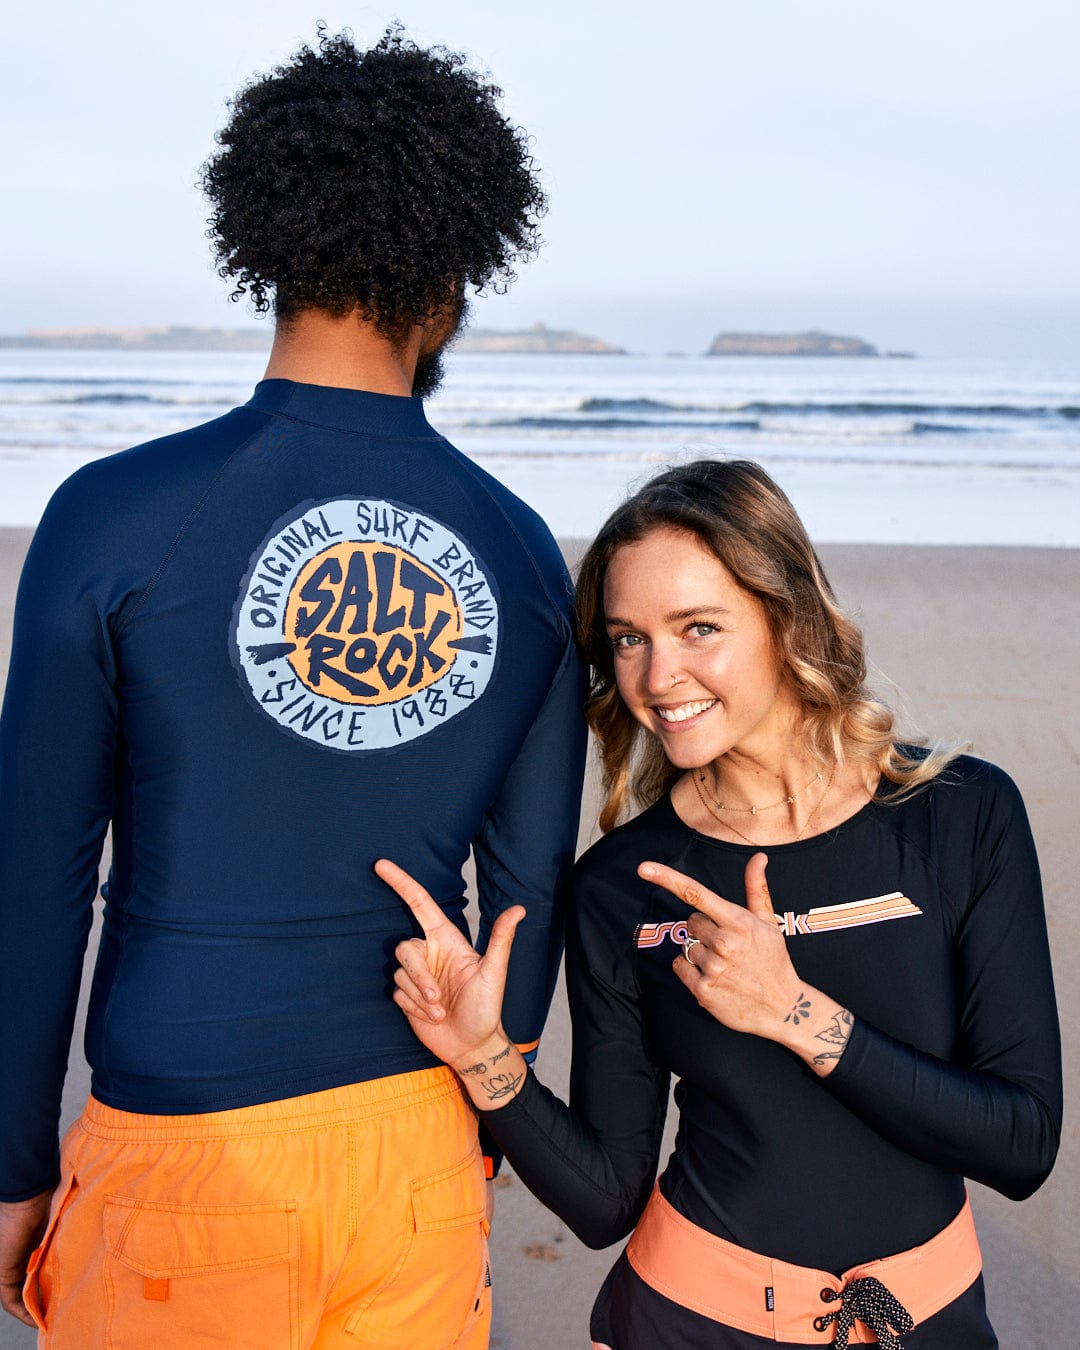 Two people on a beach, one making a shaka sign, wearing surf apparel including boardshorts with a logo "Saltrock" visible on a shirt. They are smiling and seem happy.